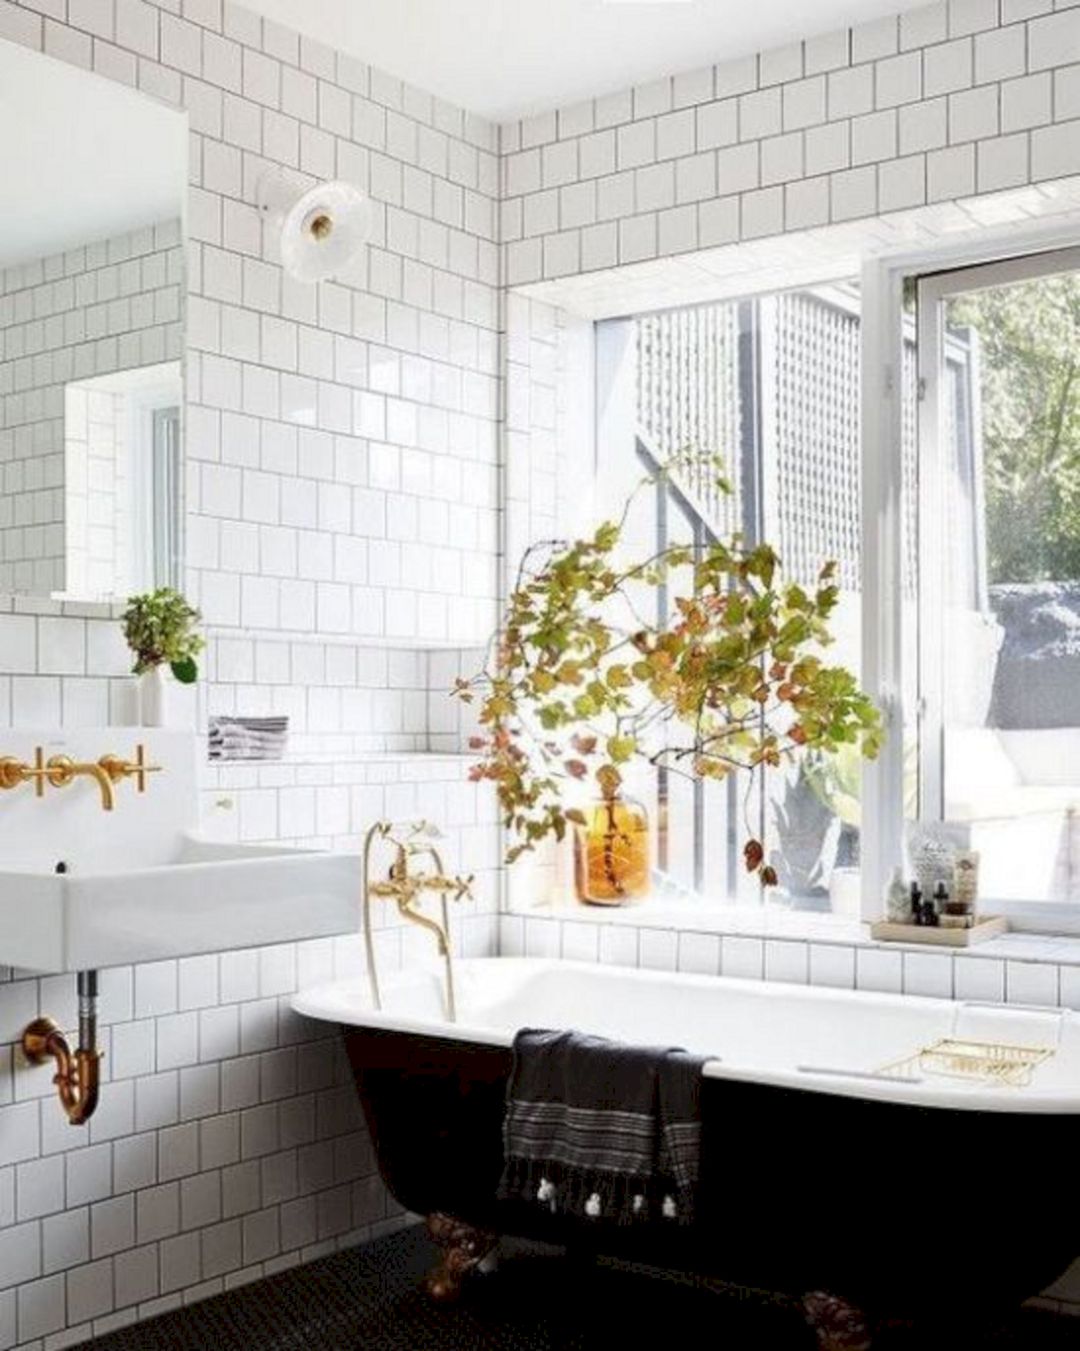 Bathroom Decor Ideas With Fall Leaf Arrangements And Some Amber Bottles From Homyhomee